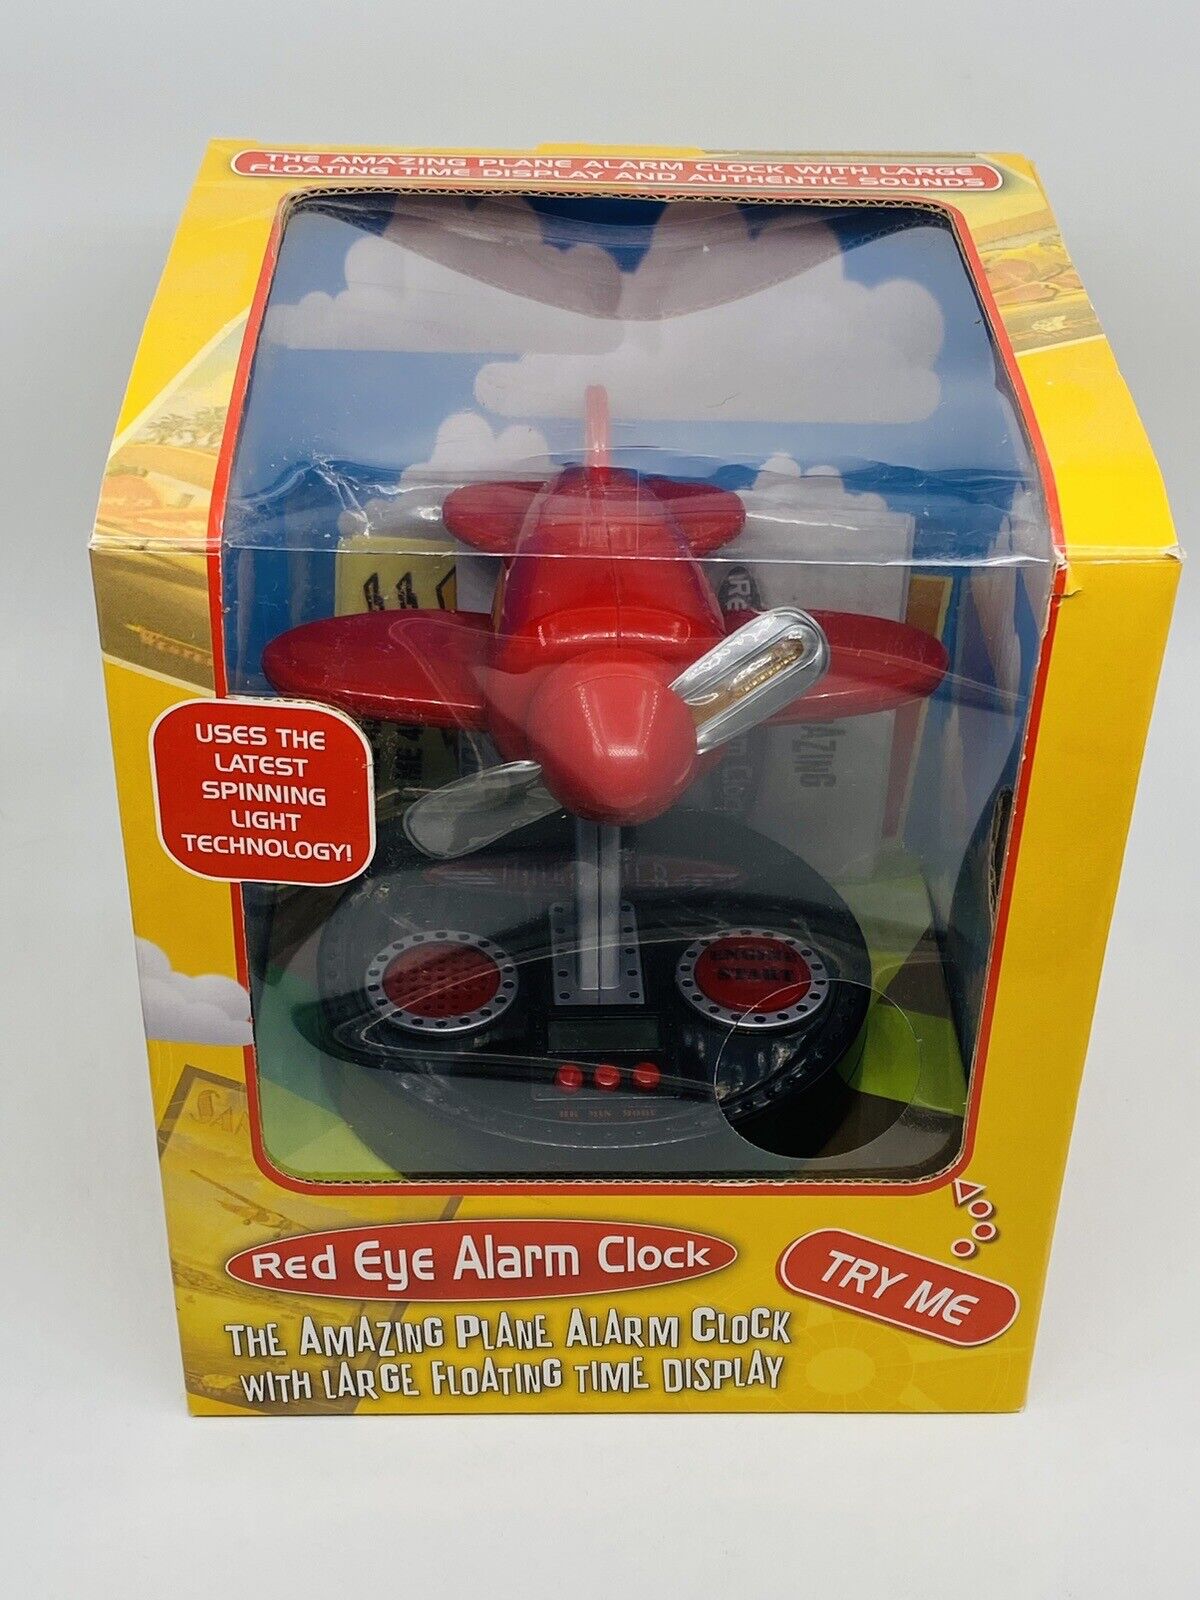 Red Eye Alarm Clock Airplane W/ Floating Time Display Spinning Light Technology